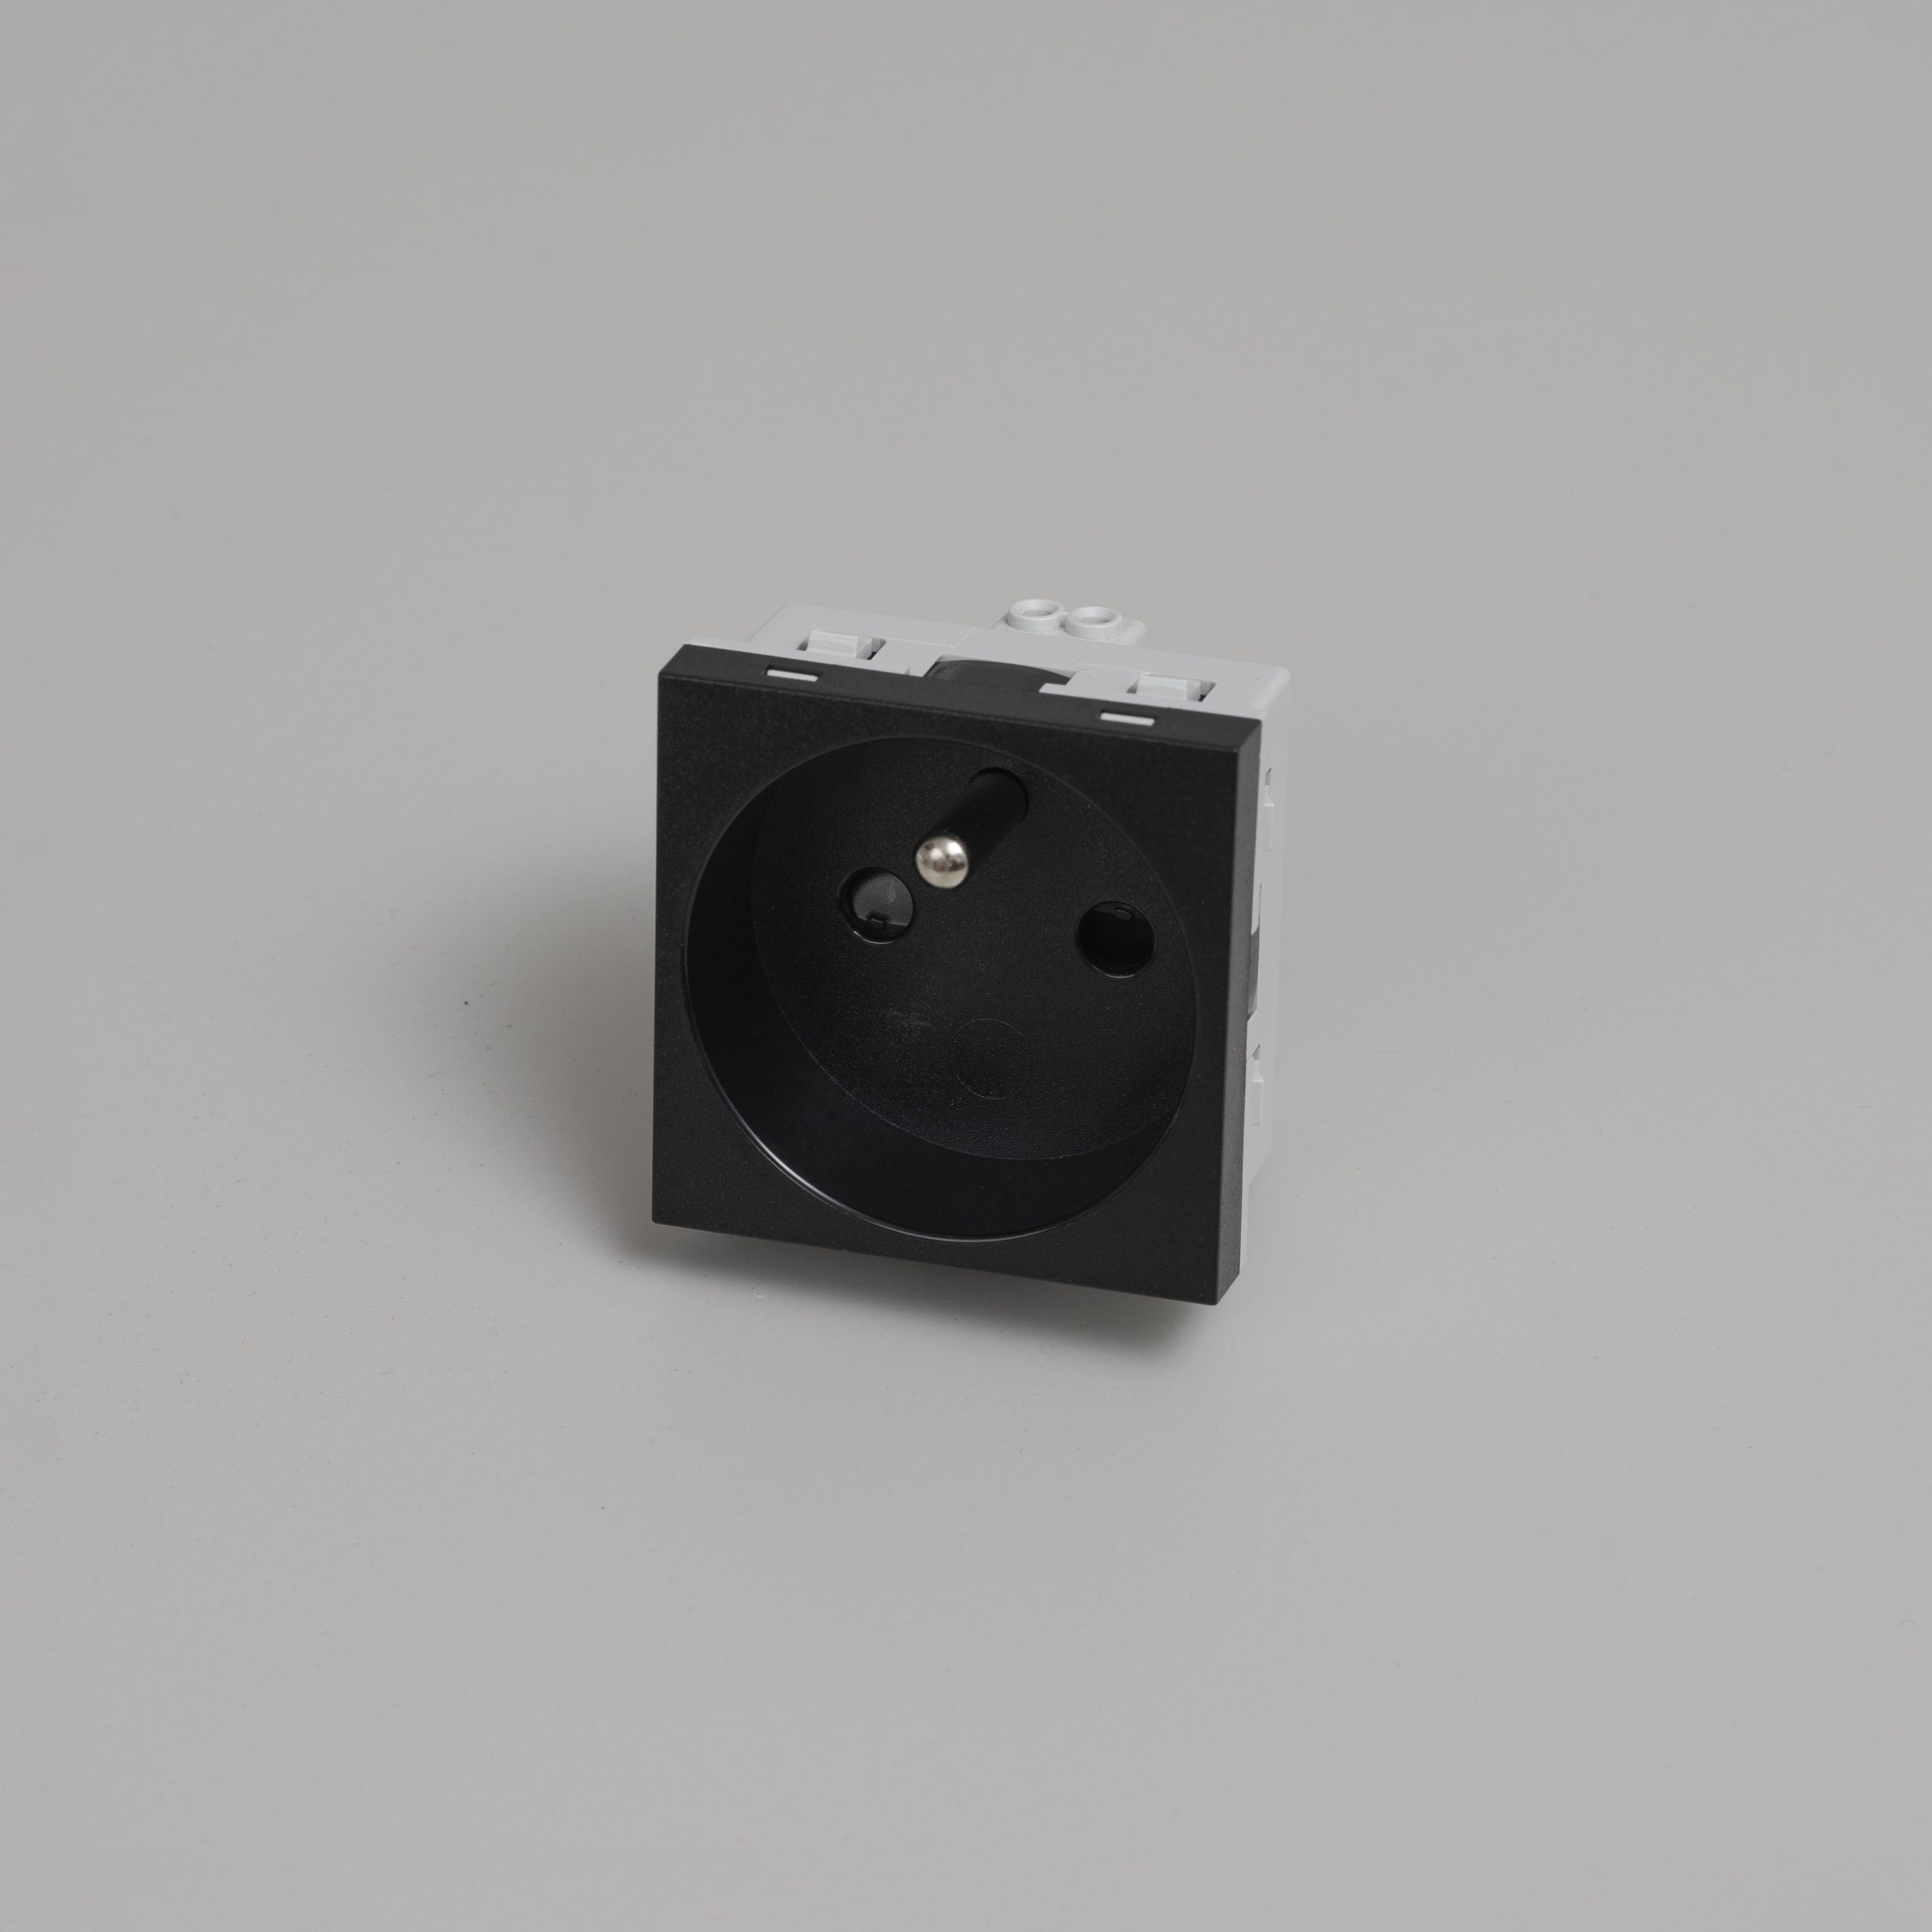 GSM power socket for France, Belgium and other countries, Made in